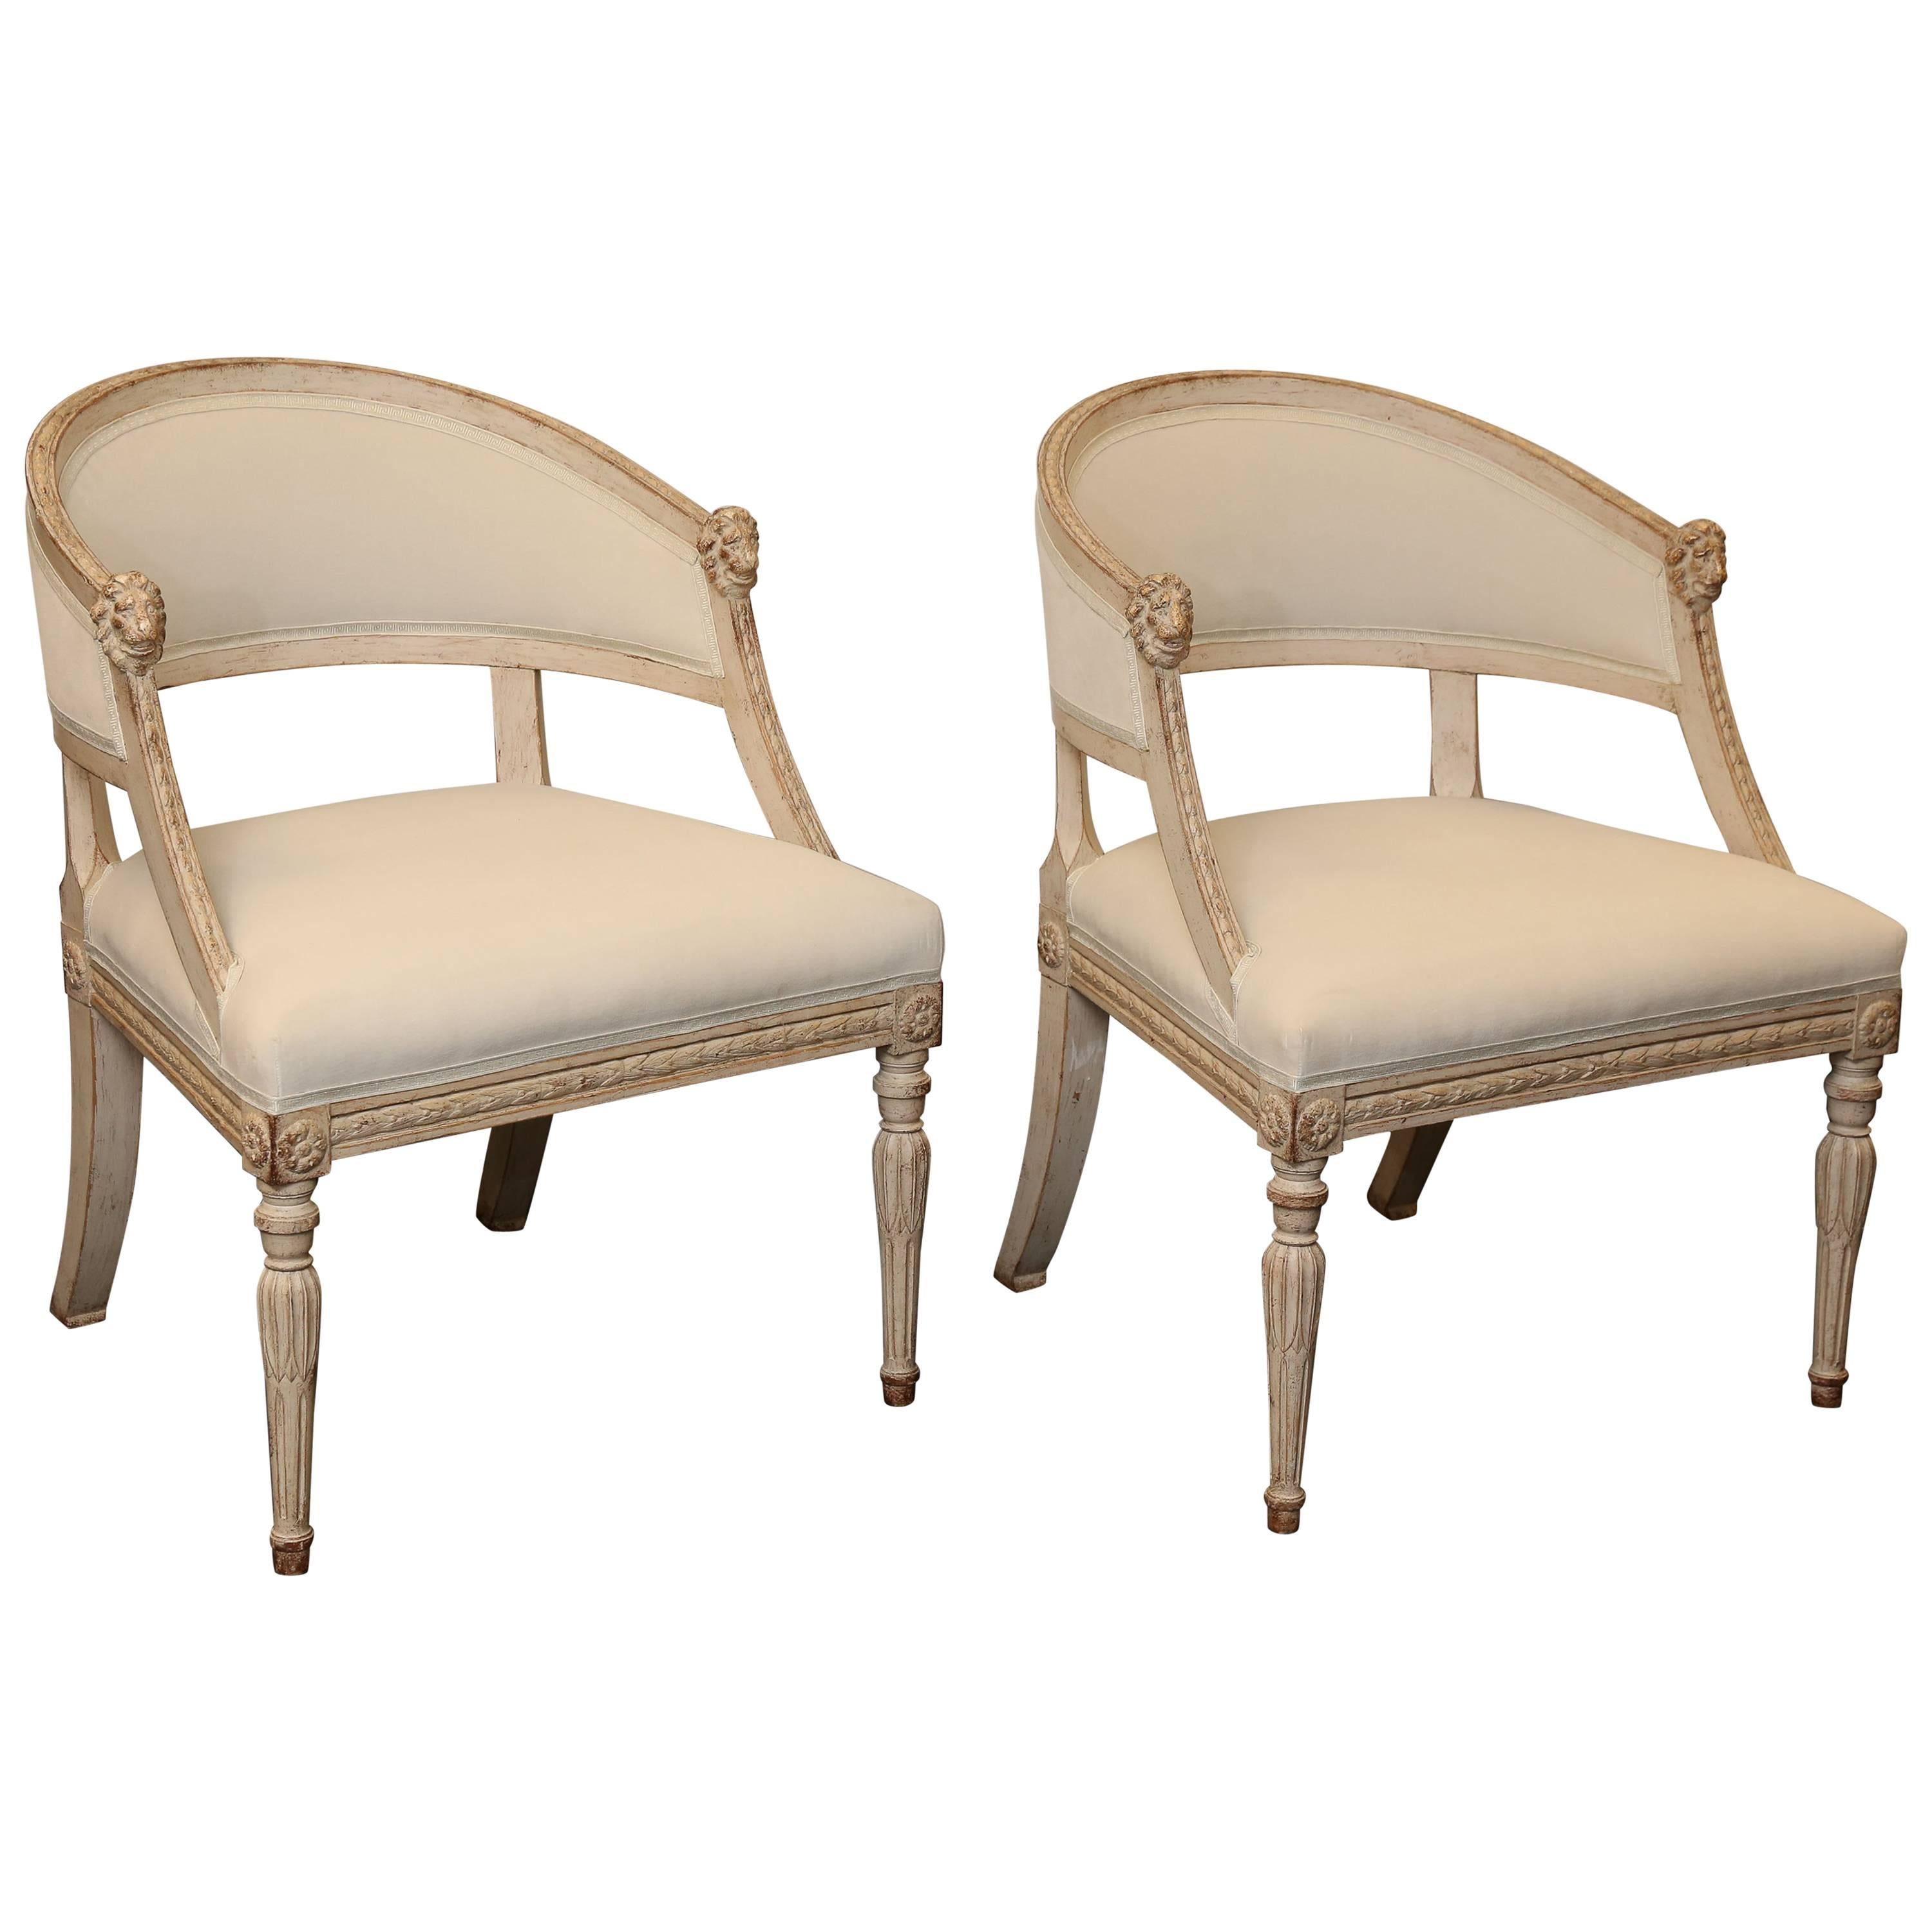 Pair of 19th Century Gustavian Barrel Back Chairs